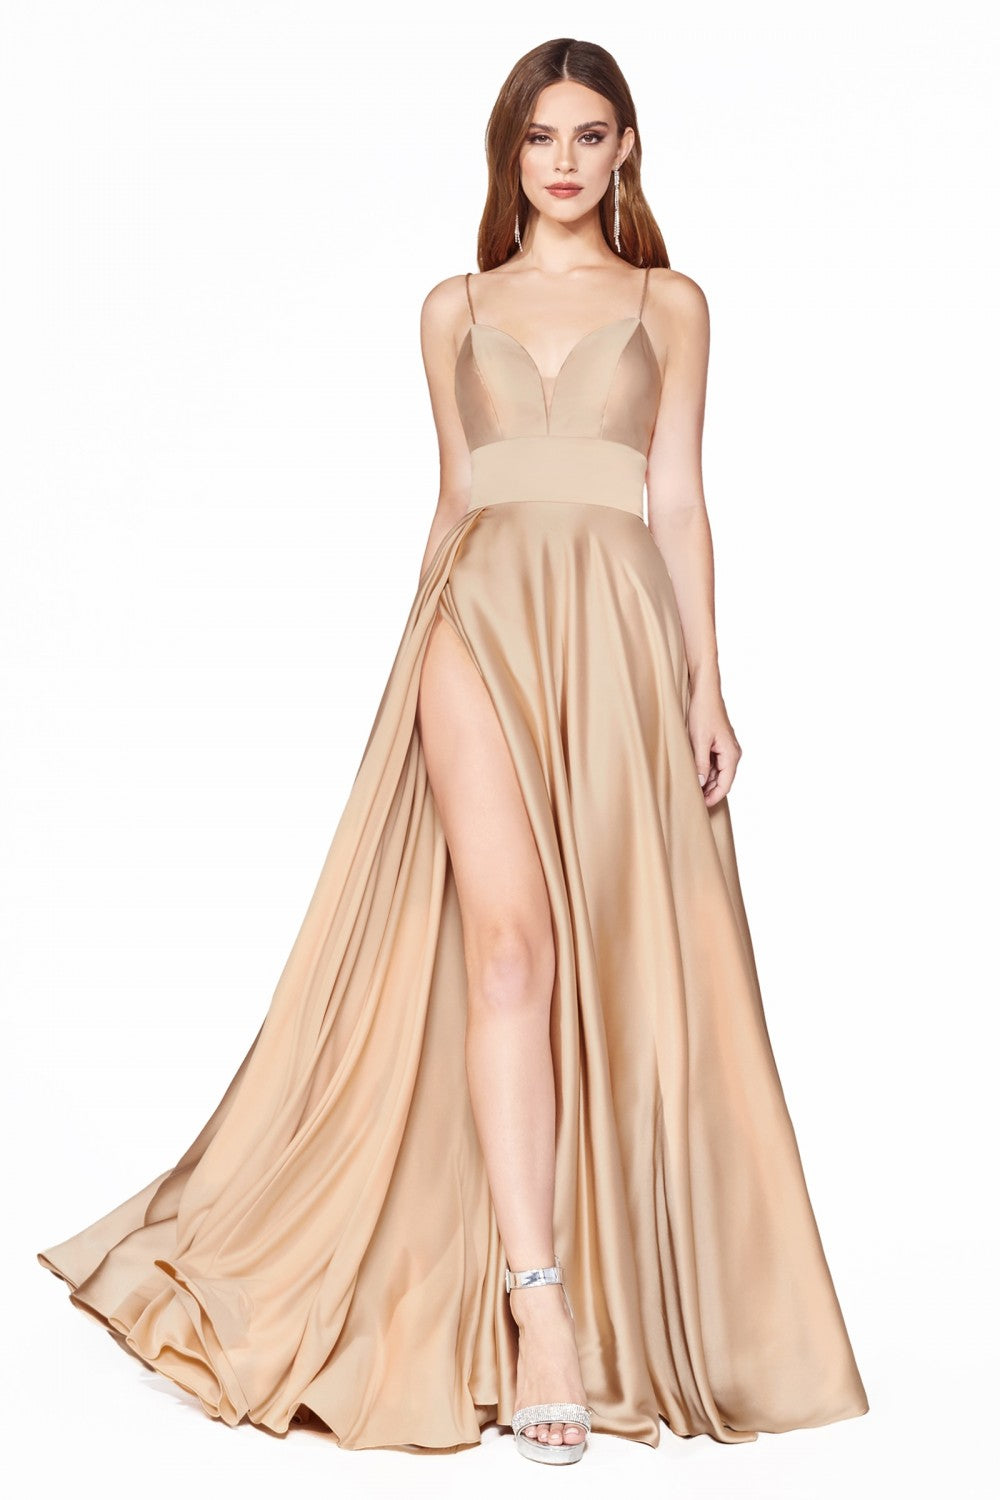 A-line Satin Prom & Bridesmaid Gown Illusion V-neckline Strap Dress Fitted on a waist style with Hugh Leg Slit CDCJ523 Elsy Style Evening Dress